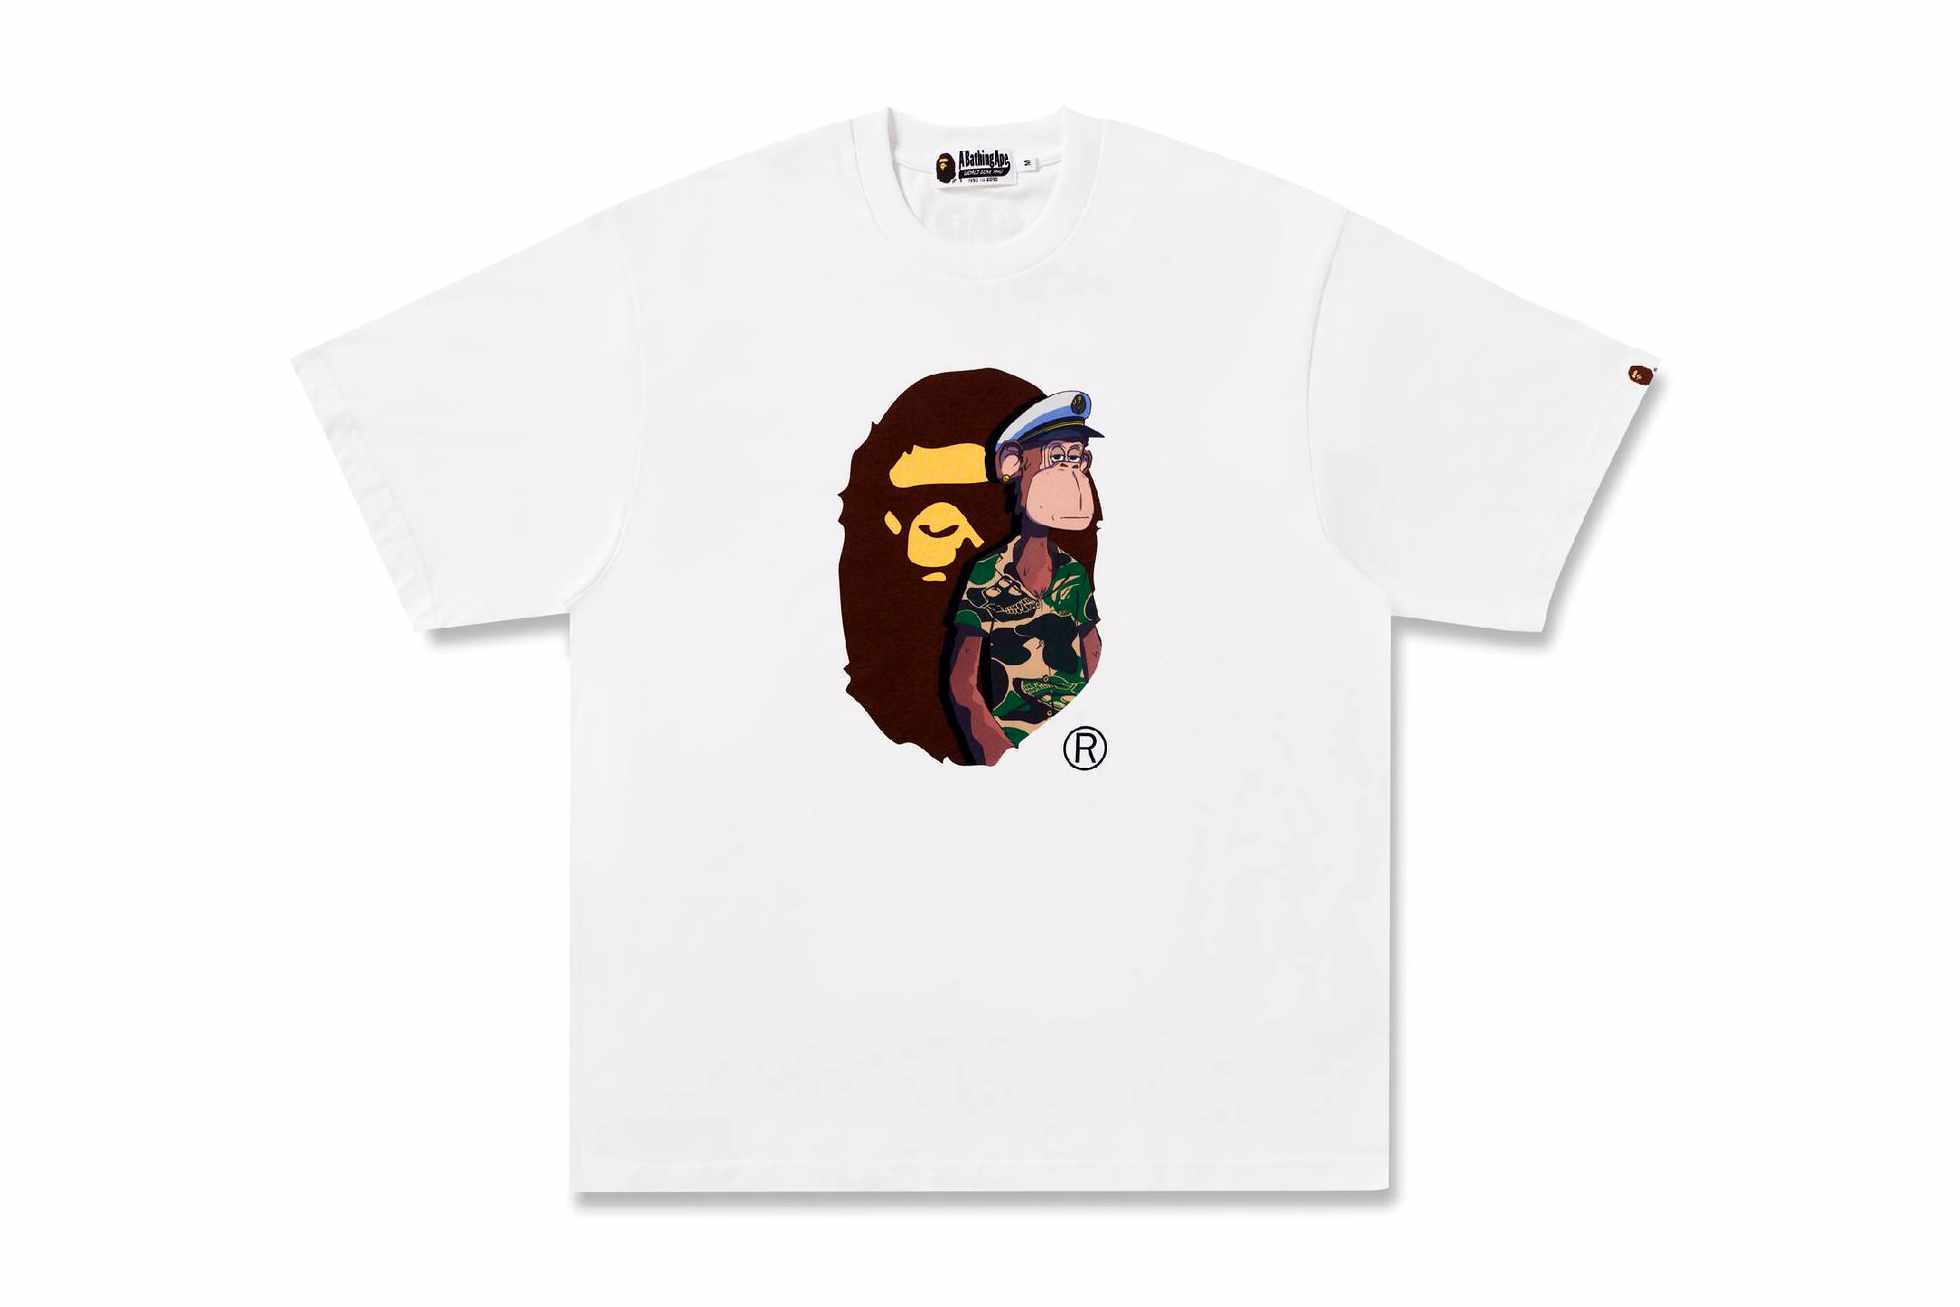 bape and bored ape yacht club's collaborative white t-shirt with a camouflage ape head